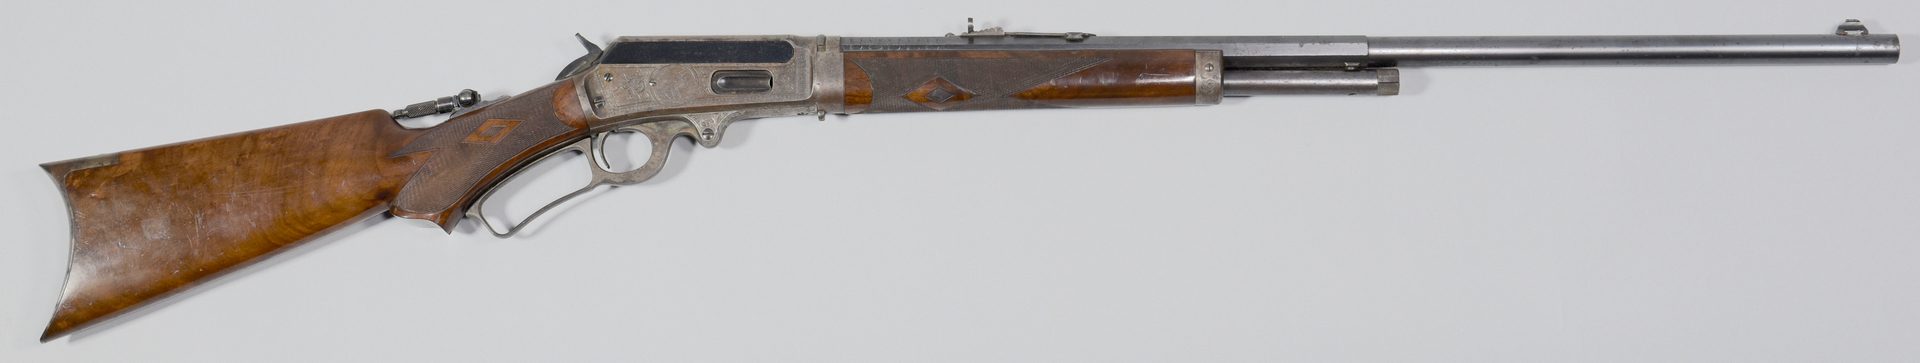 Lot 307: Marlin Special Order Deluxe Rifle, Model 1893